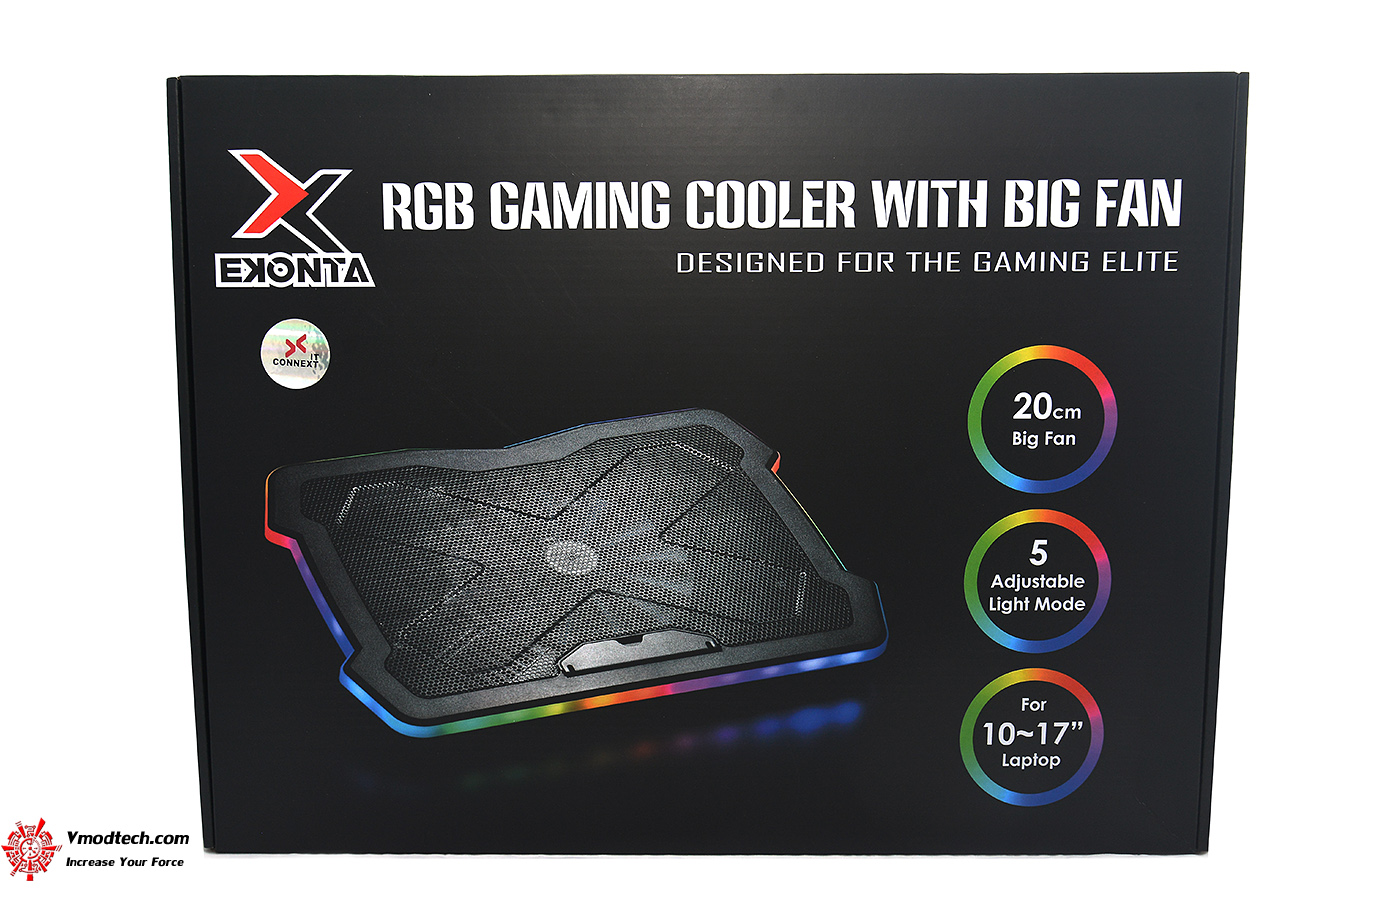 dsc 5749 EKONTA RGB GAMING COOLING WITH BIG FAN REVIEW